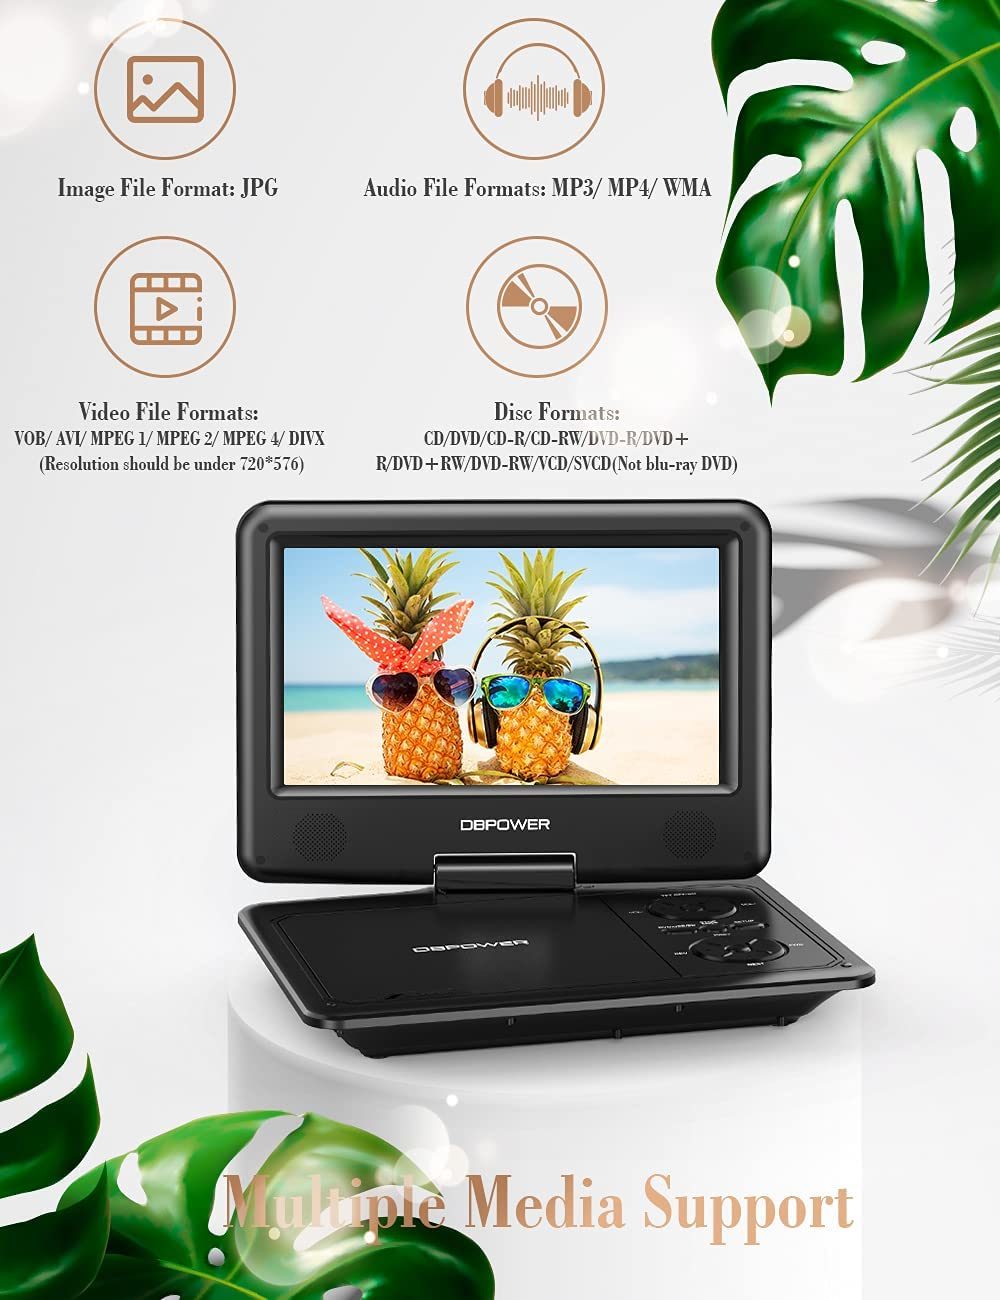 DBPOWER 11.5" Portable DVD Player, 5-Hour Built-in Rechargeable Battery, 9" Swivel Screen, Support CD/DVD/SD Card/USB, Remote Control, 1.8 Meter Car Charger, Power Adaptor and Car Headrest